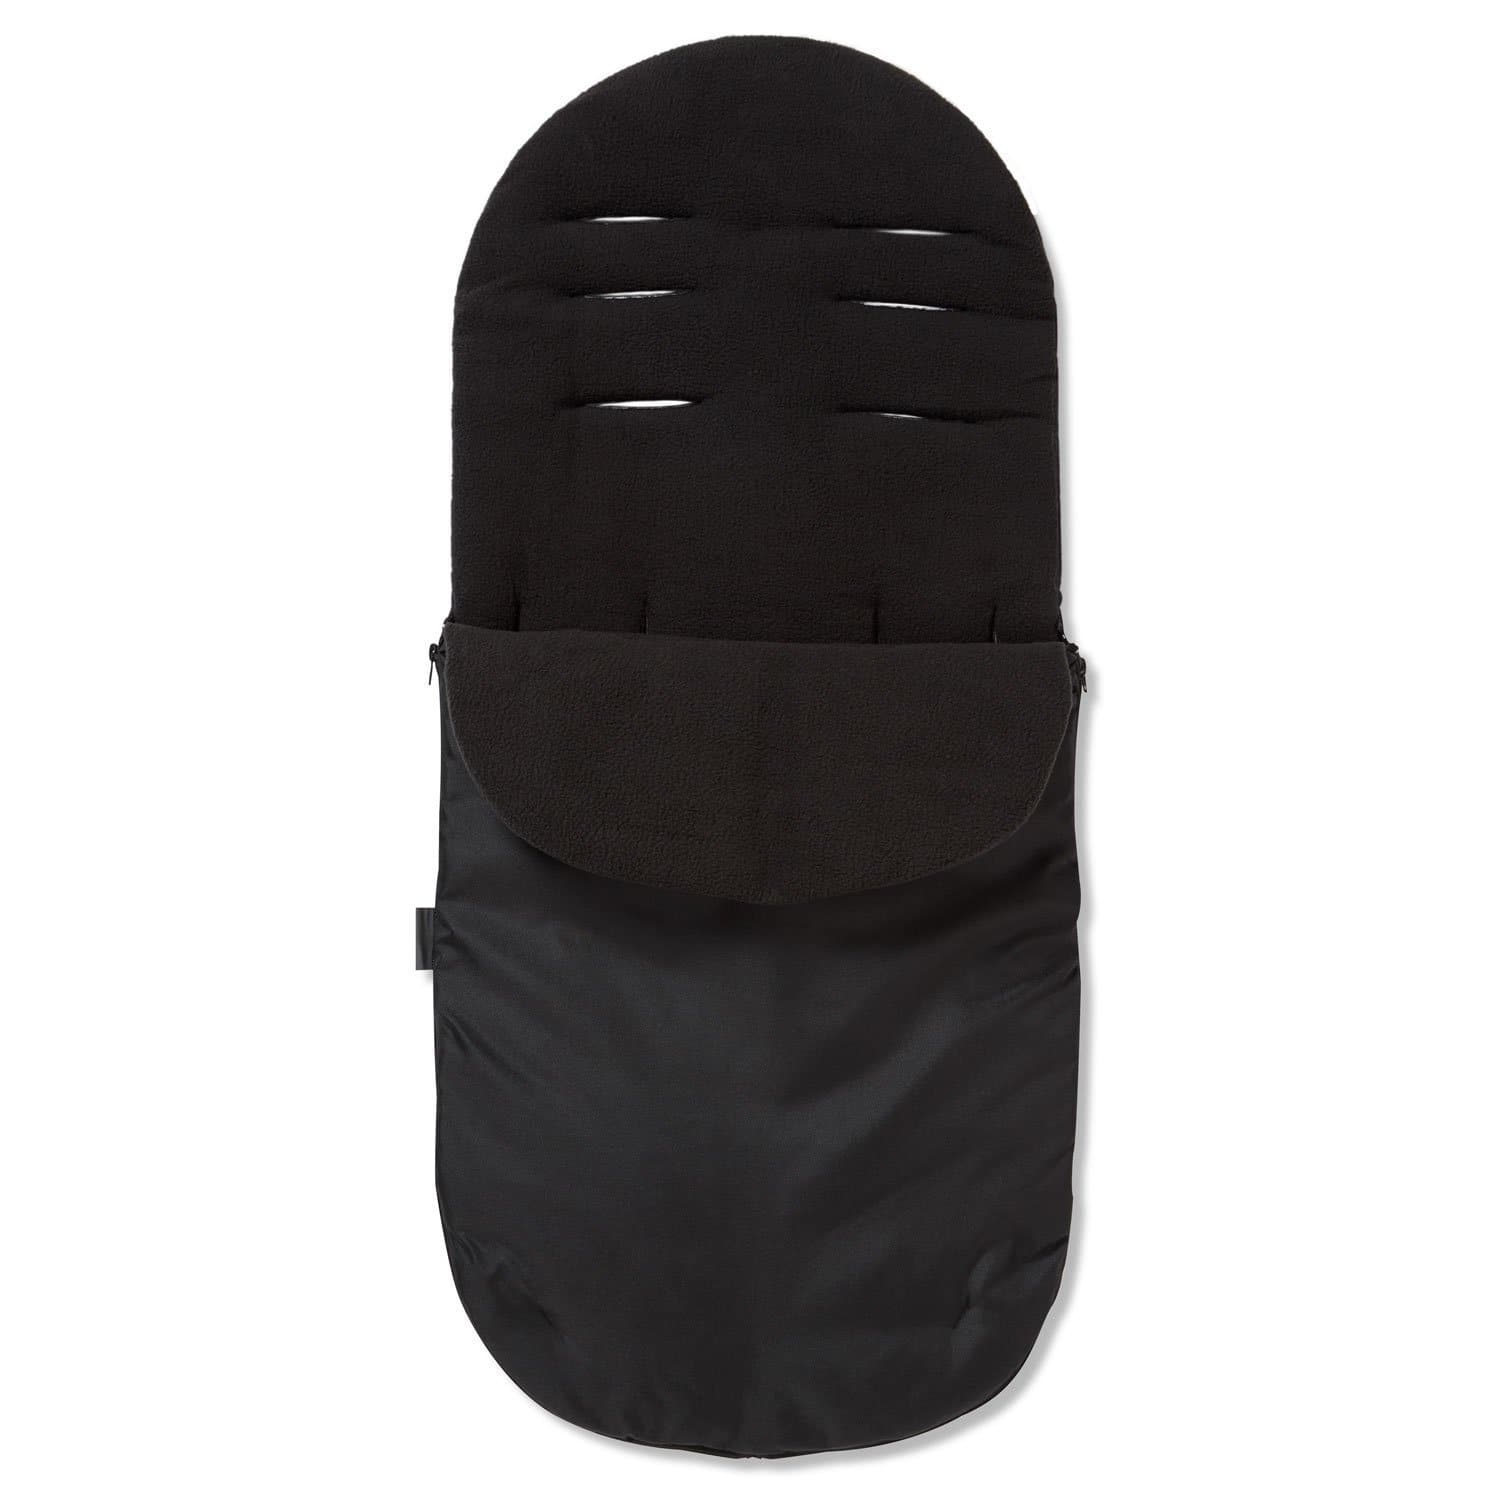 Footmuff / Cosy Toes Compatible with Gesslein - Black / Fits All Models | For Your Little One